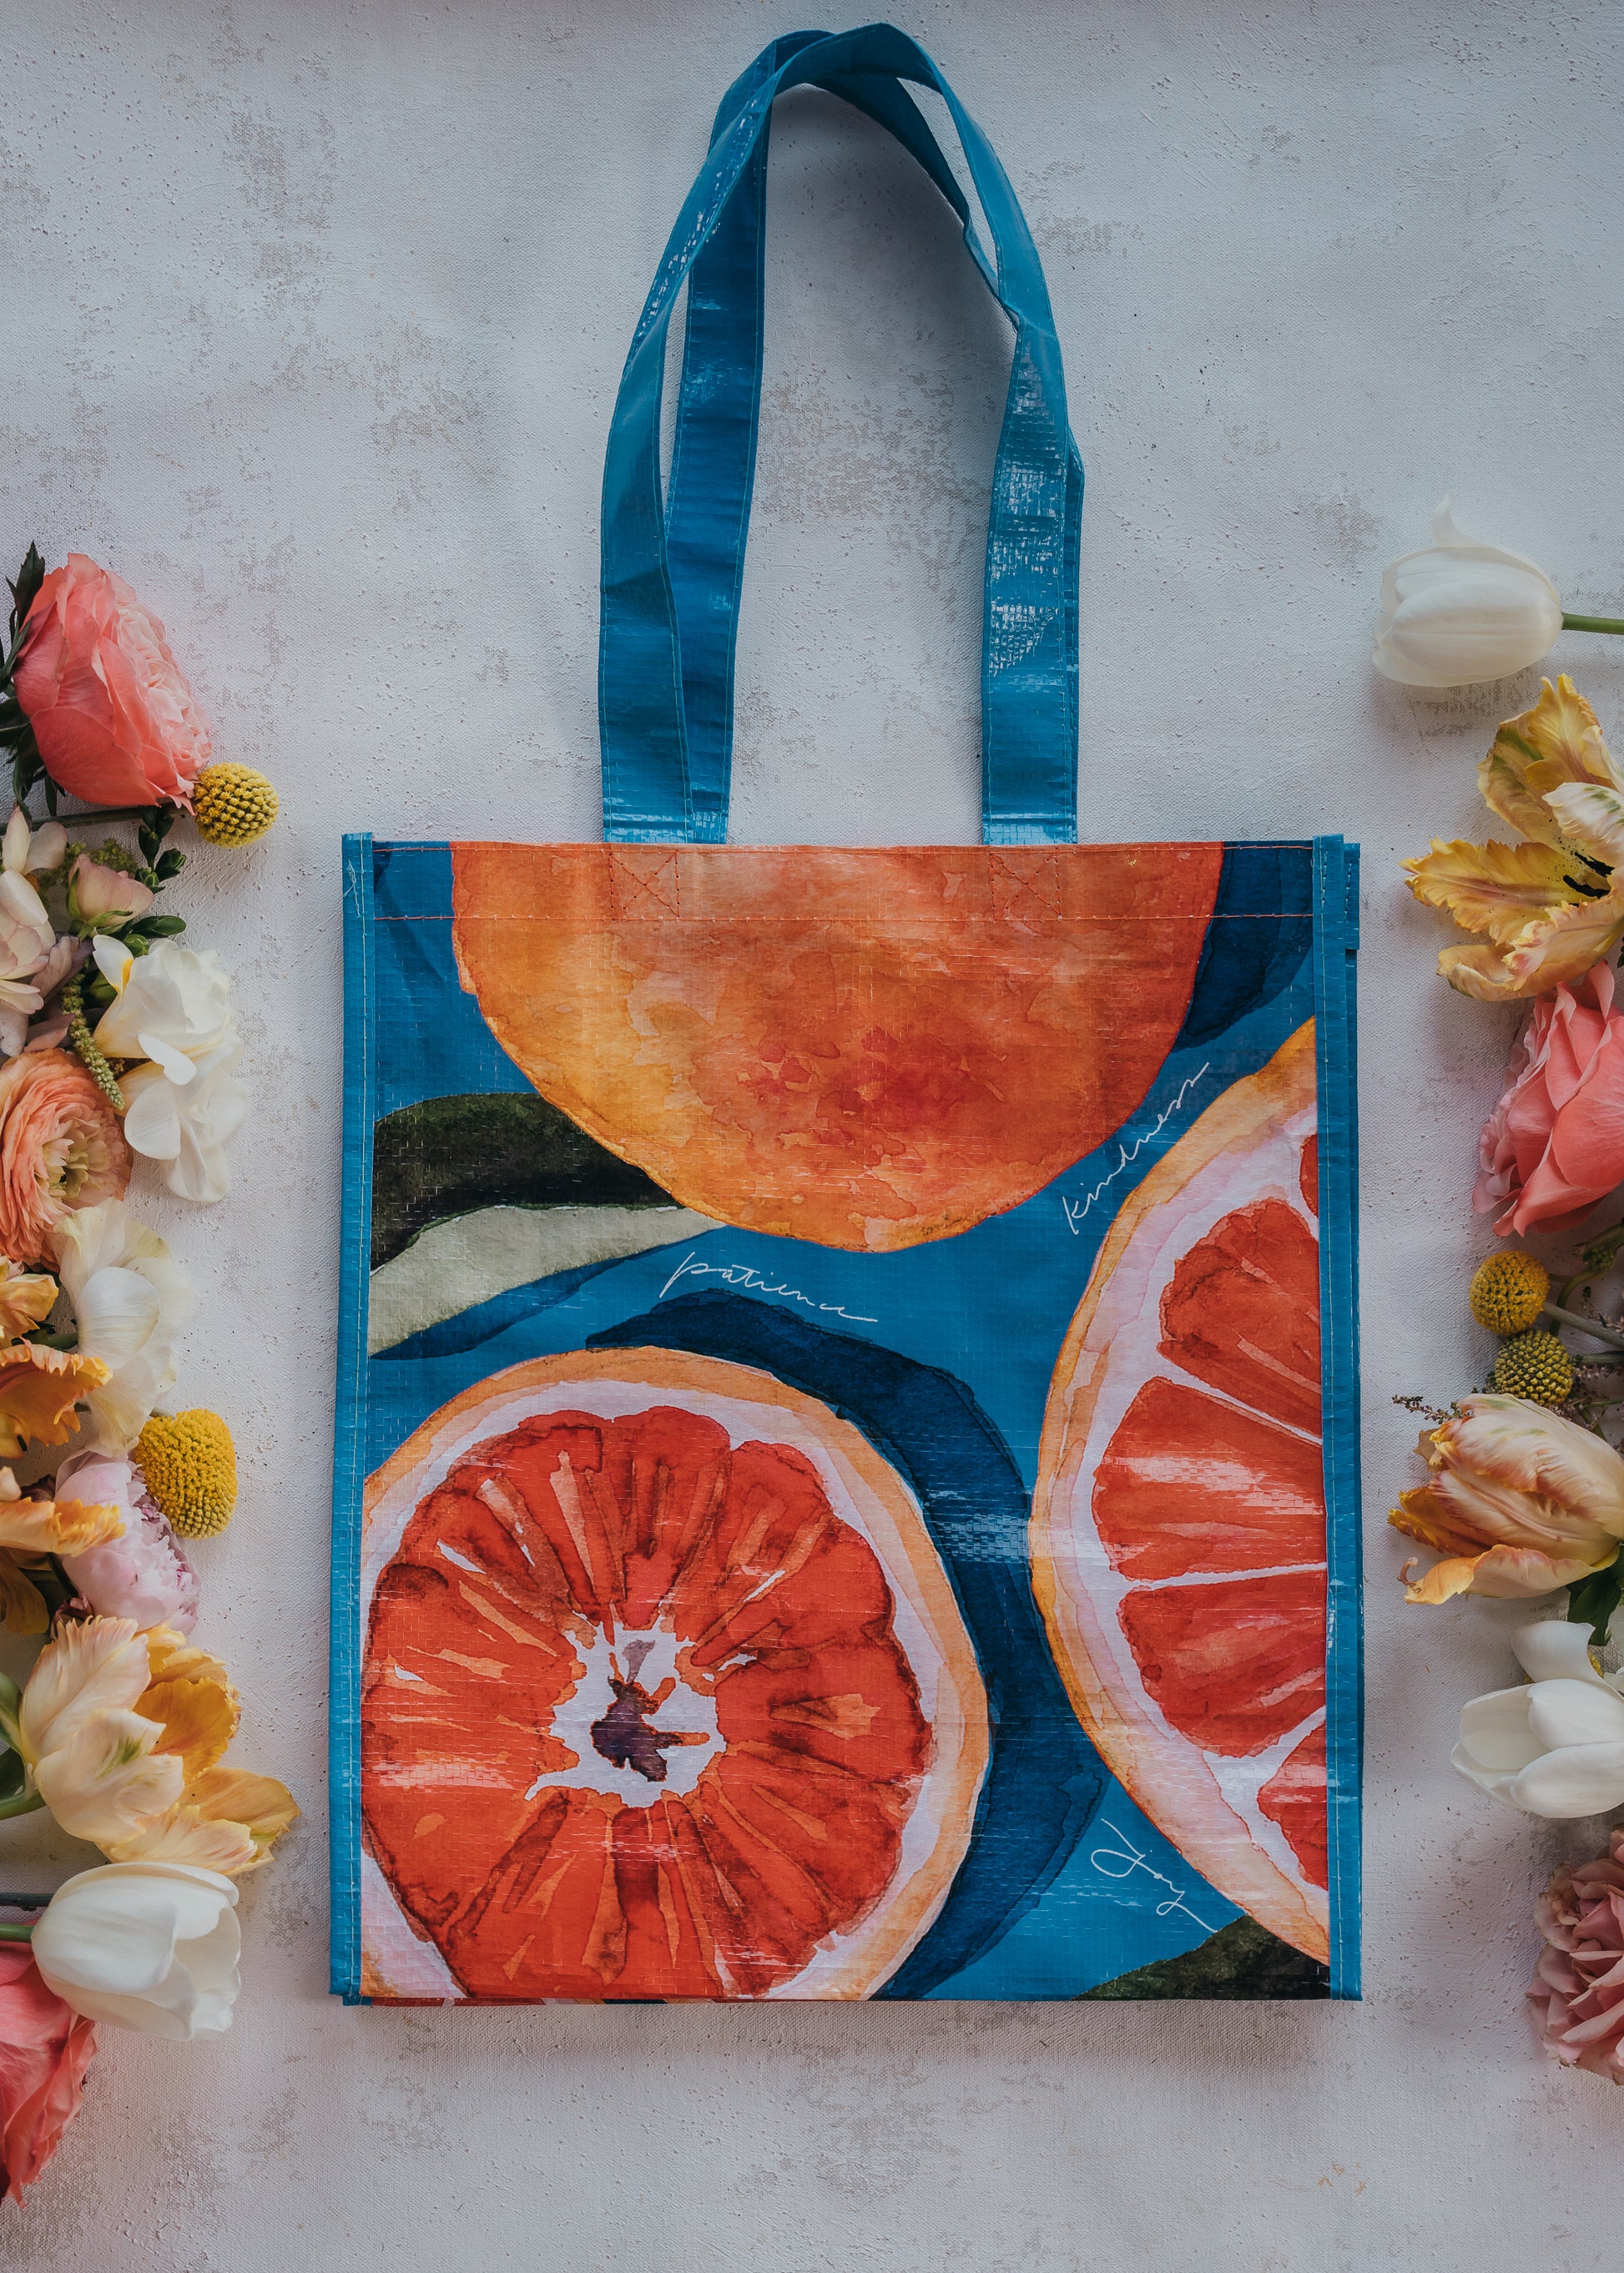 Make a Bright & Happy Hand-Painted Market Tote Bag (That's